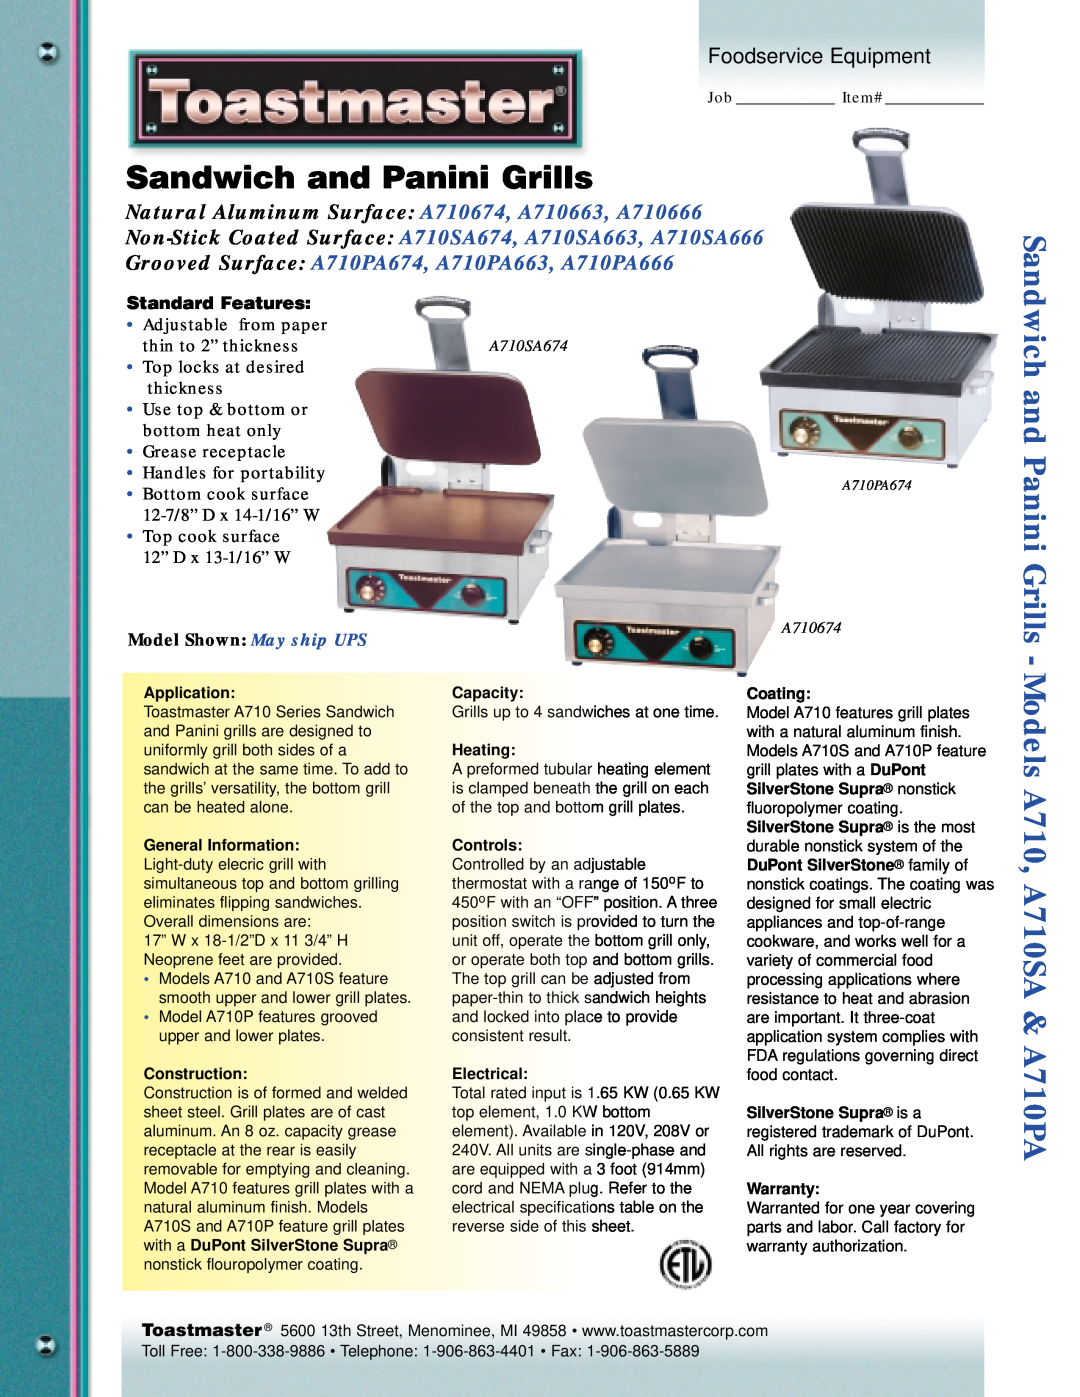 Toastmaster A710UP, A710LP, A710S installation manual Sandwich and Panini Grills, Owners Operating And, Installation Manual 